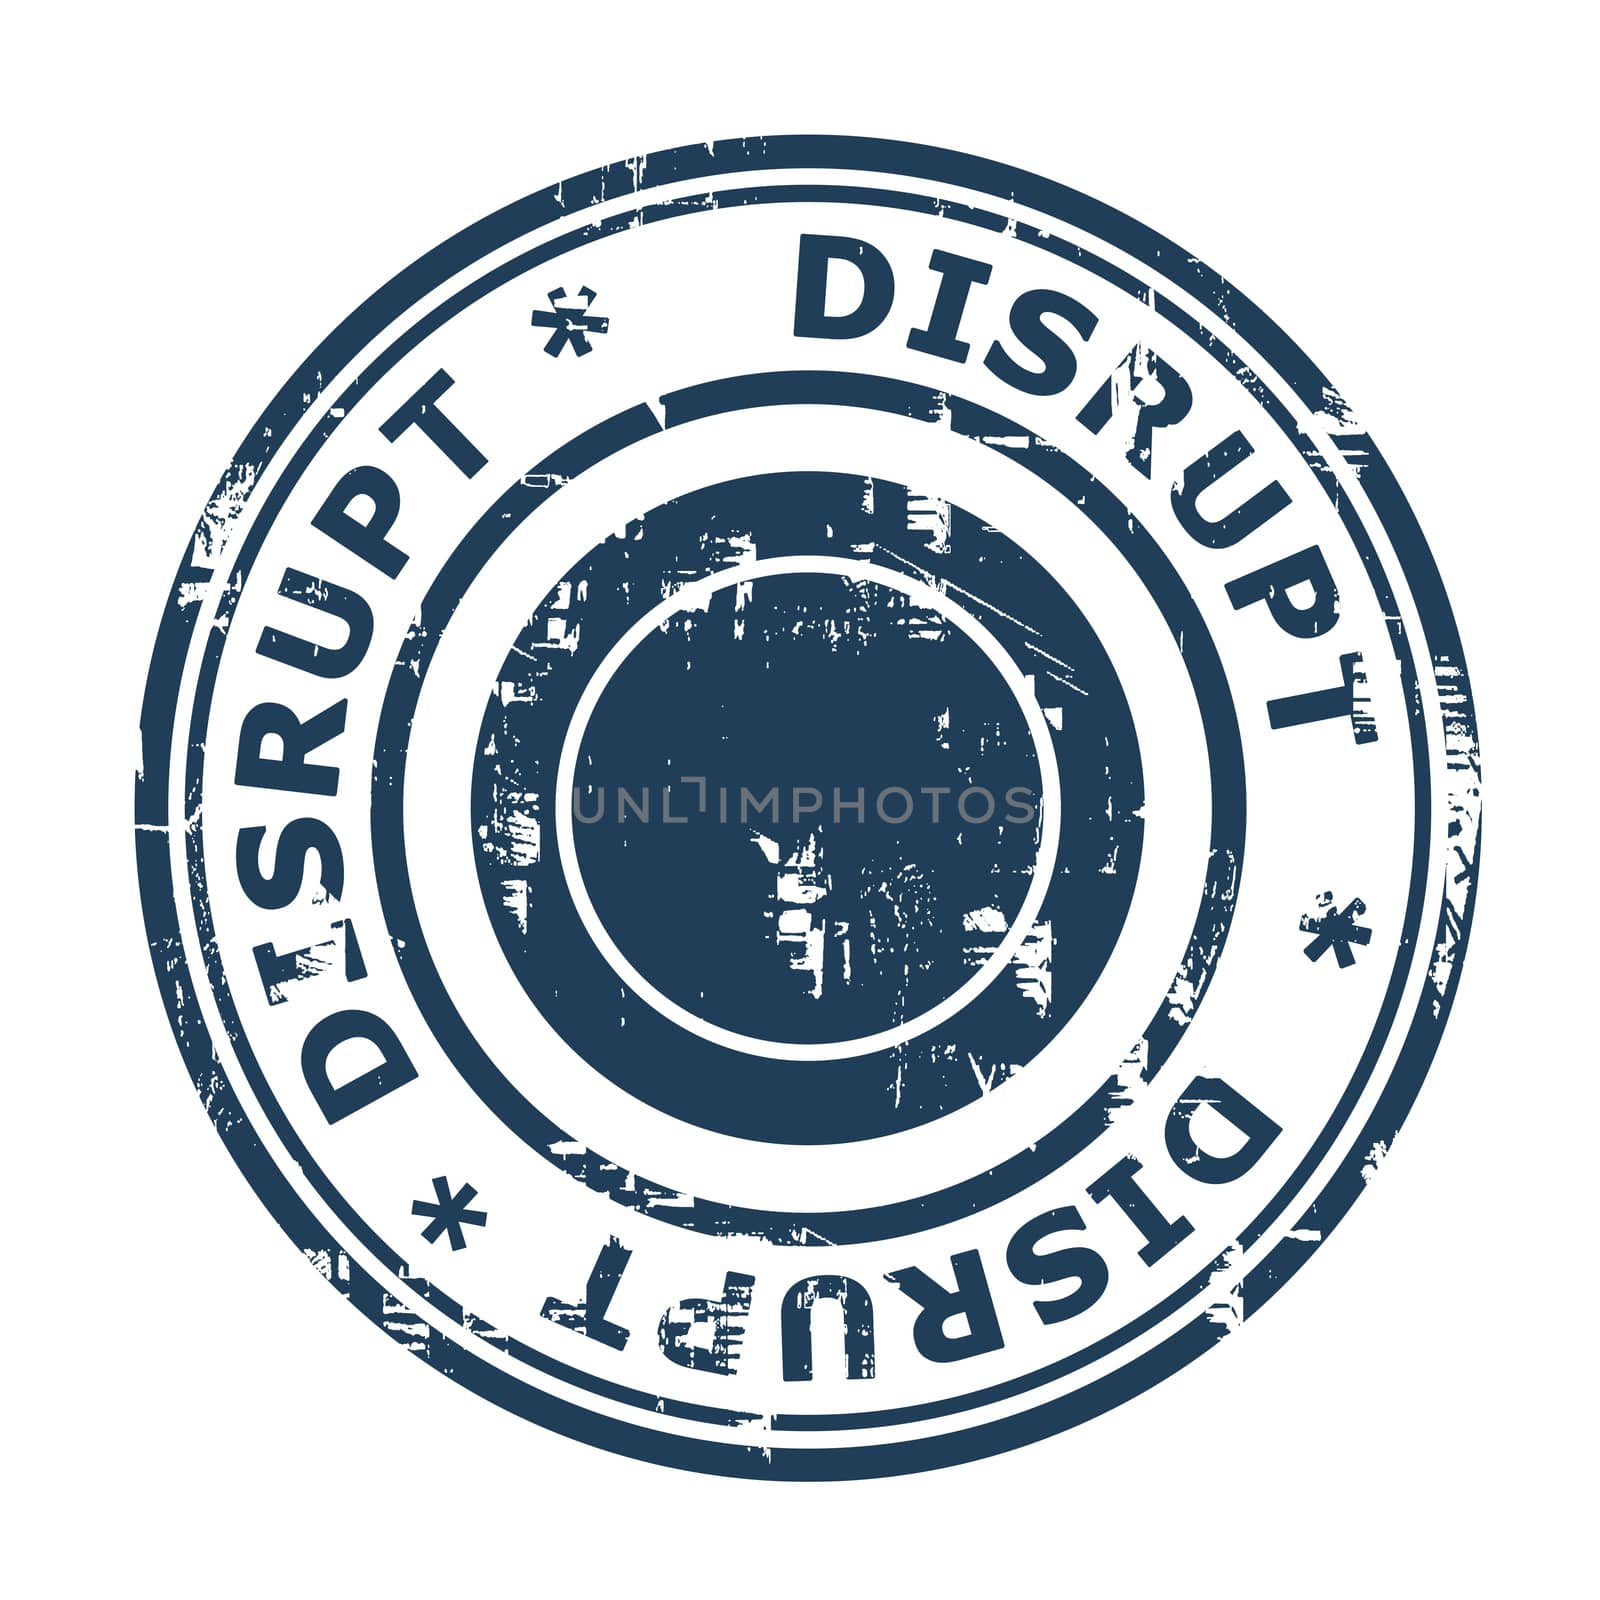 Disrupt business concept stamp isolated on a white background.